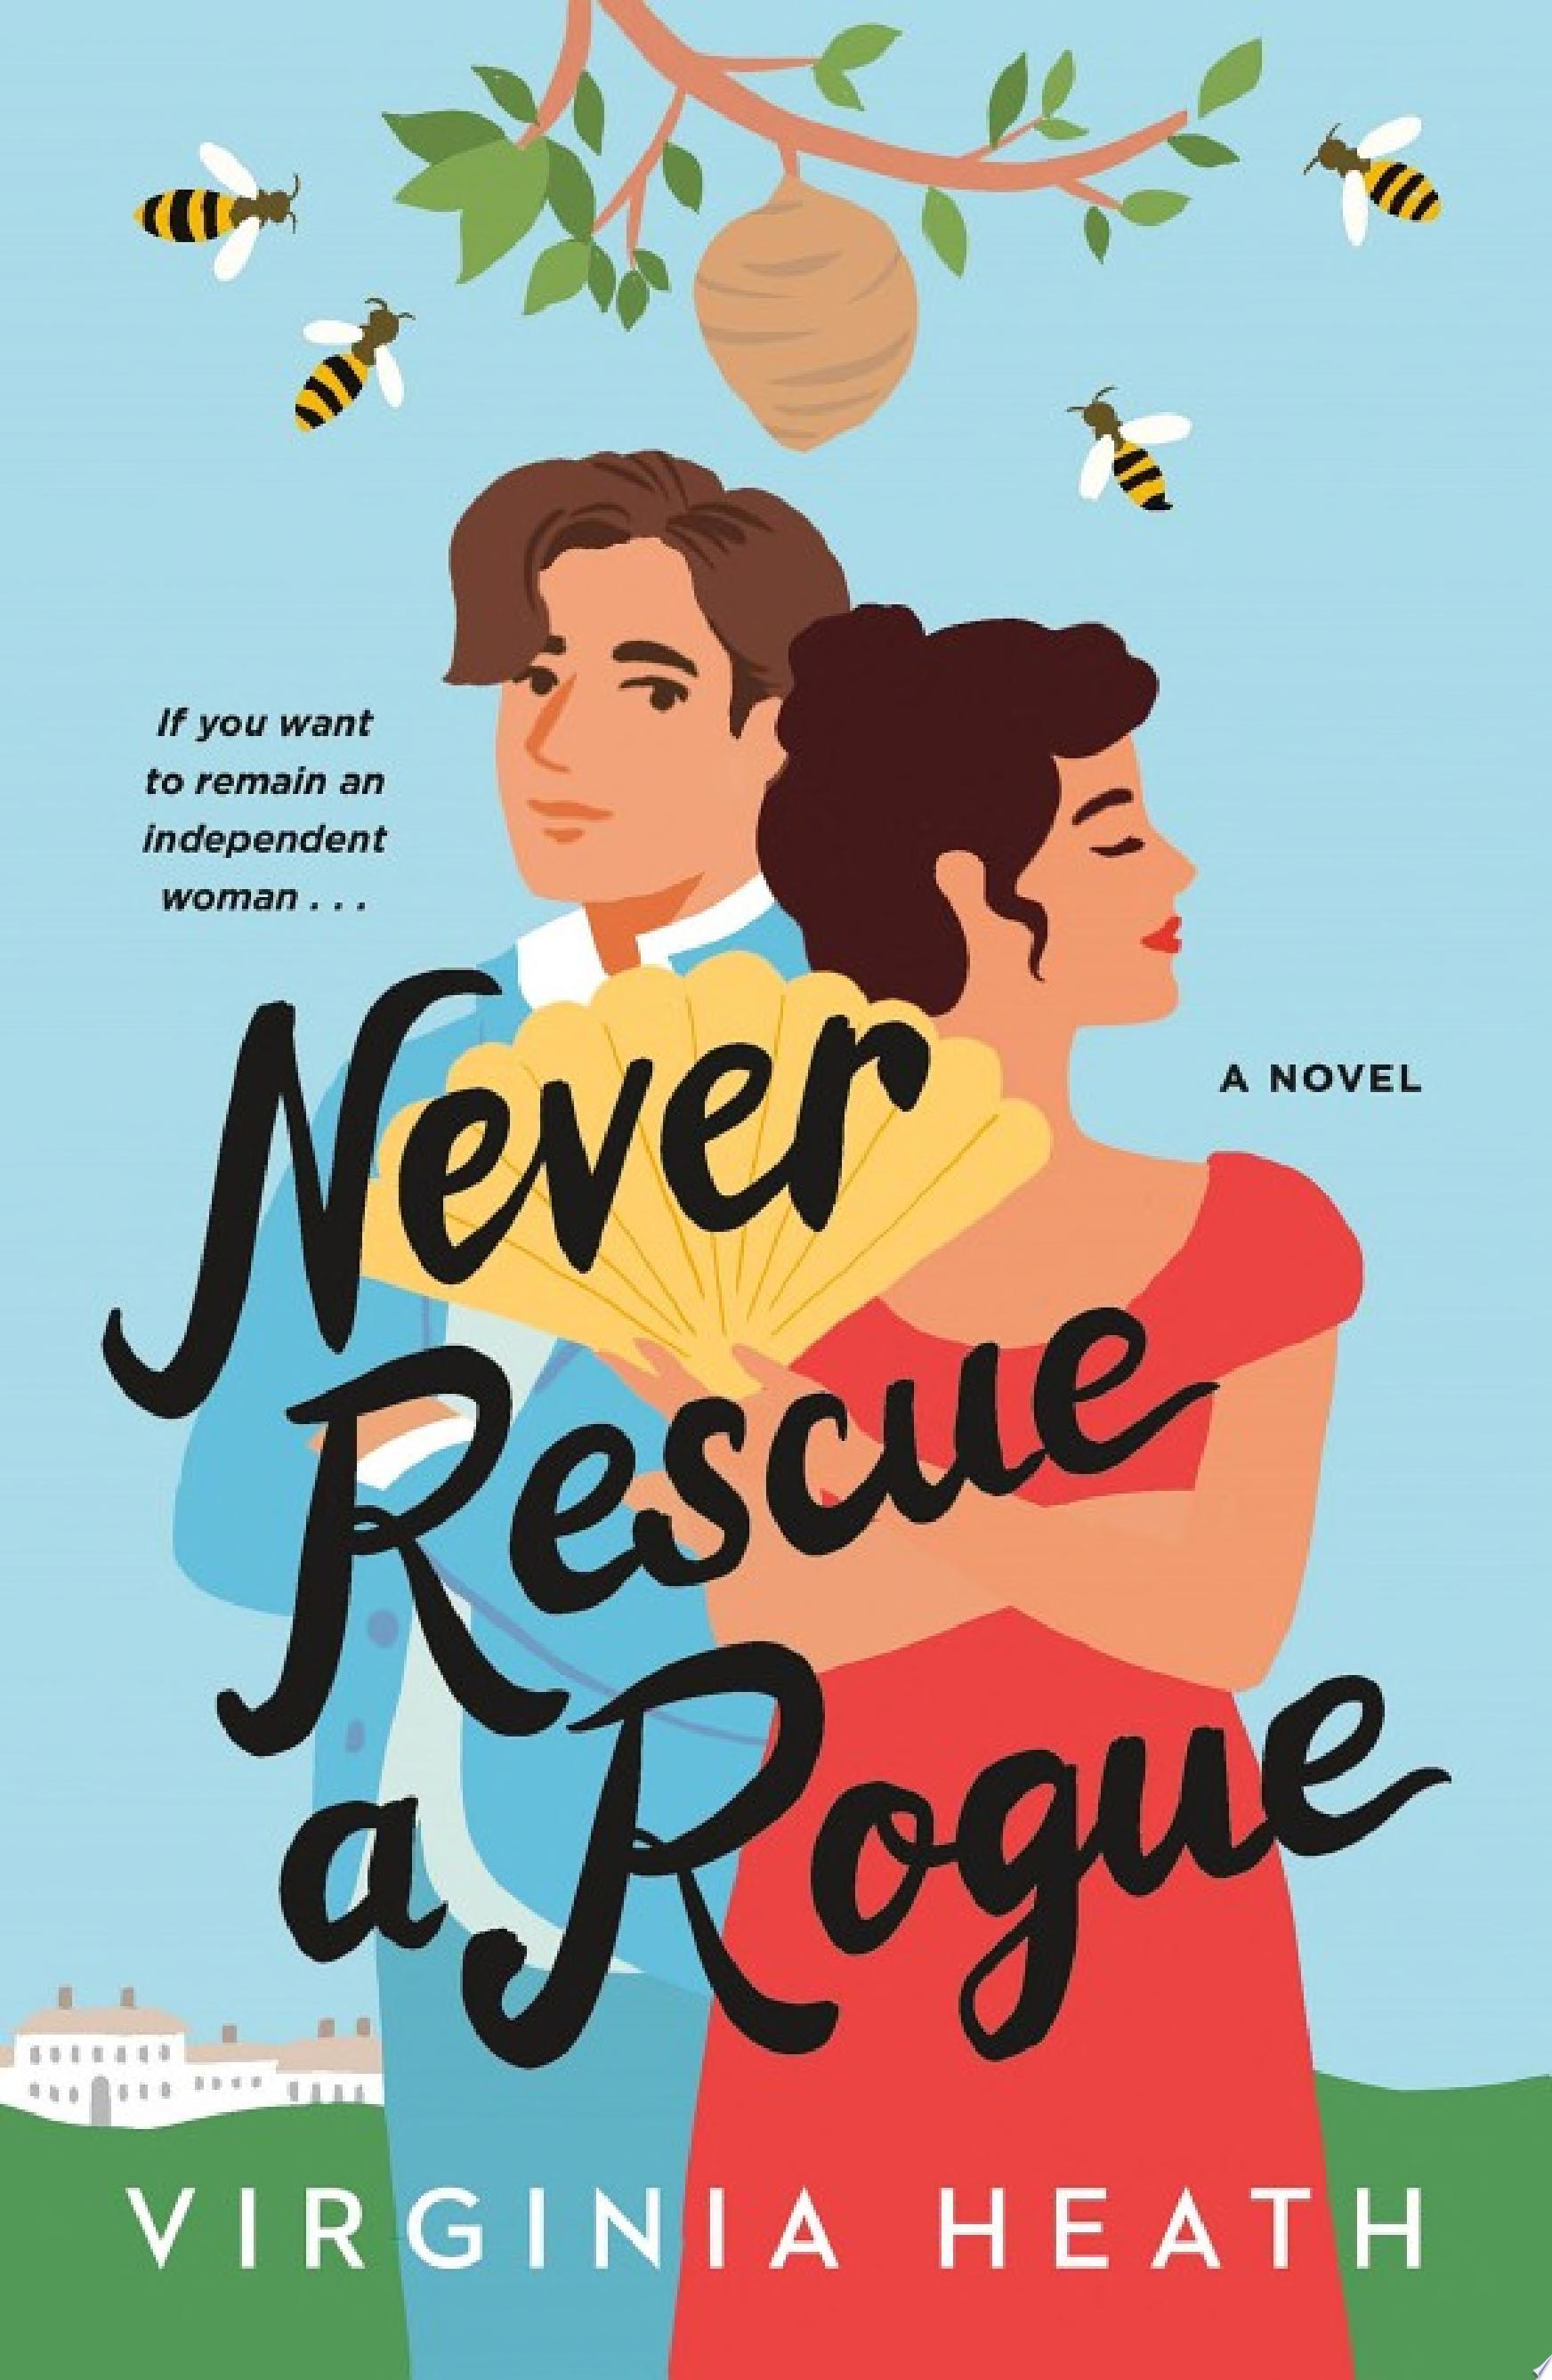 Image for "Never Rescue a Rogue"